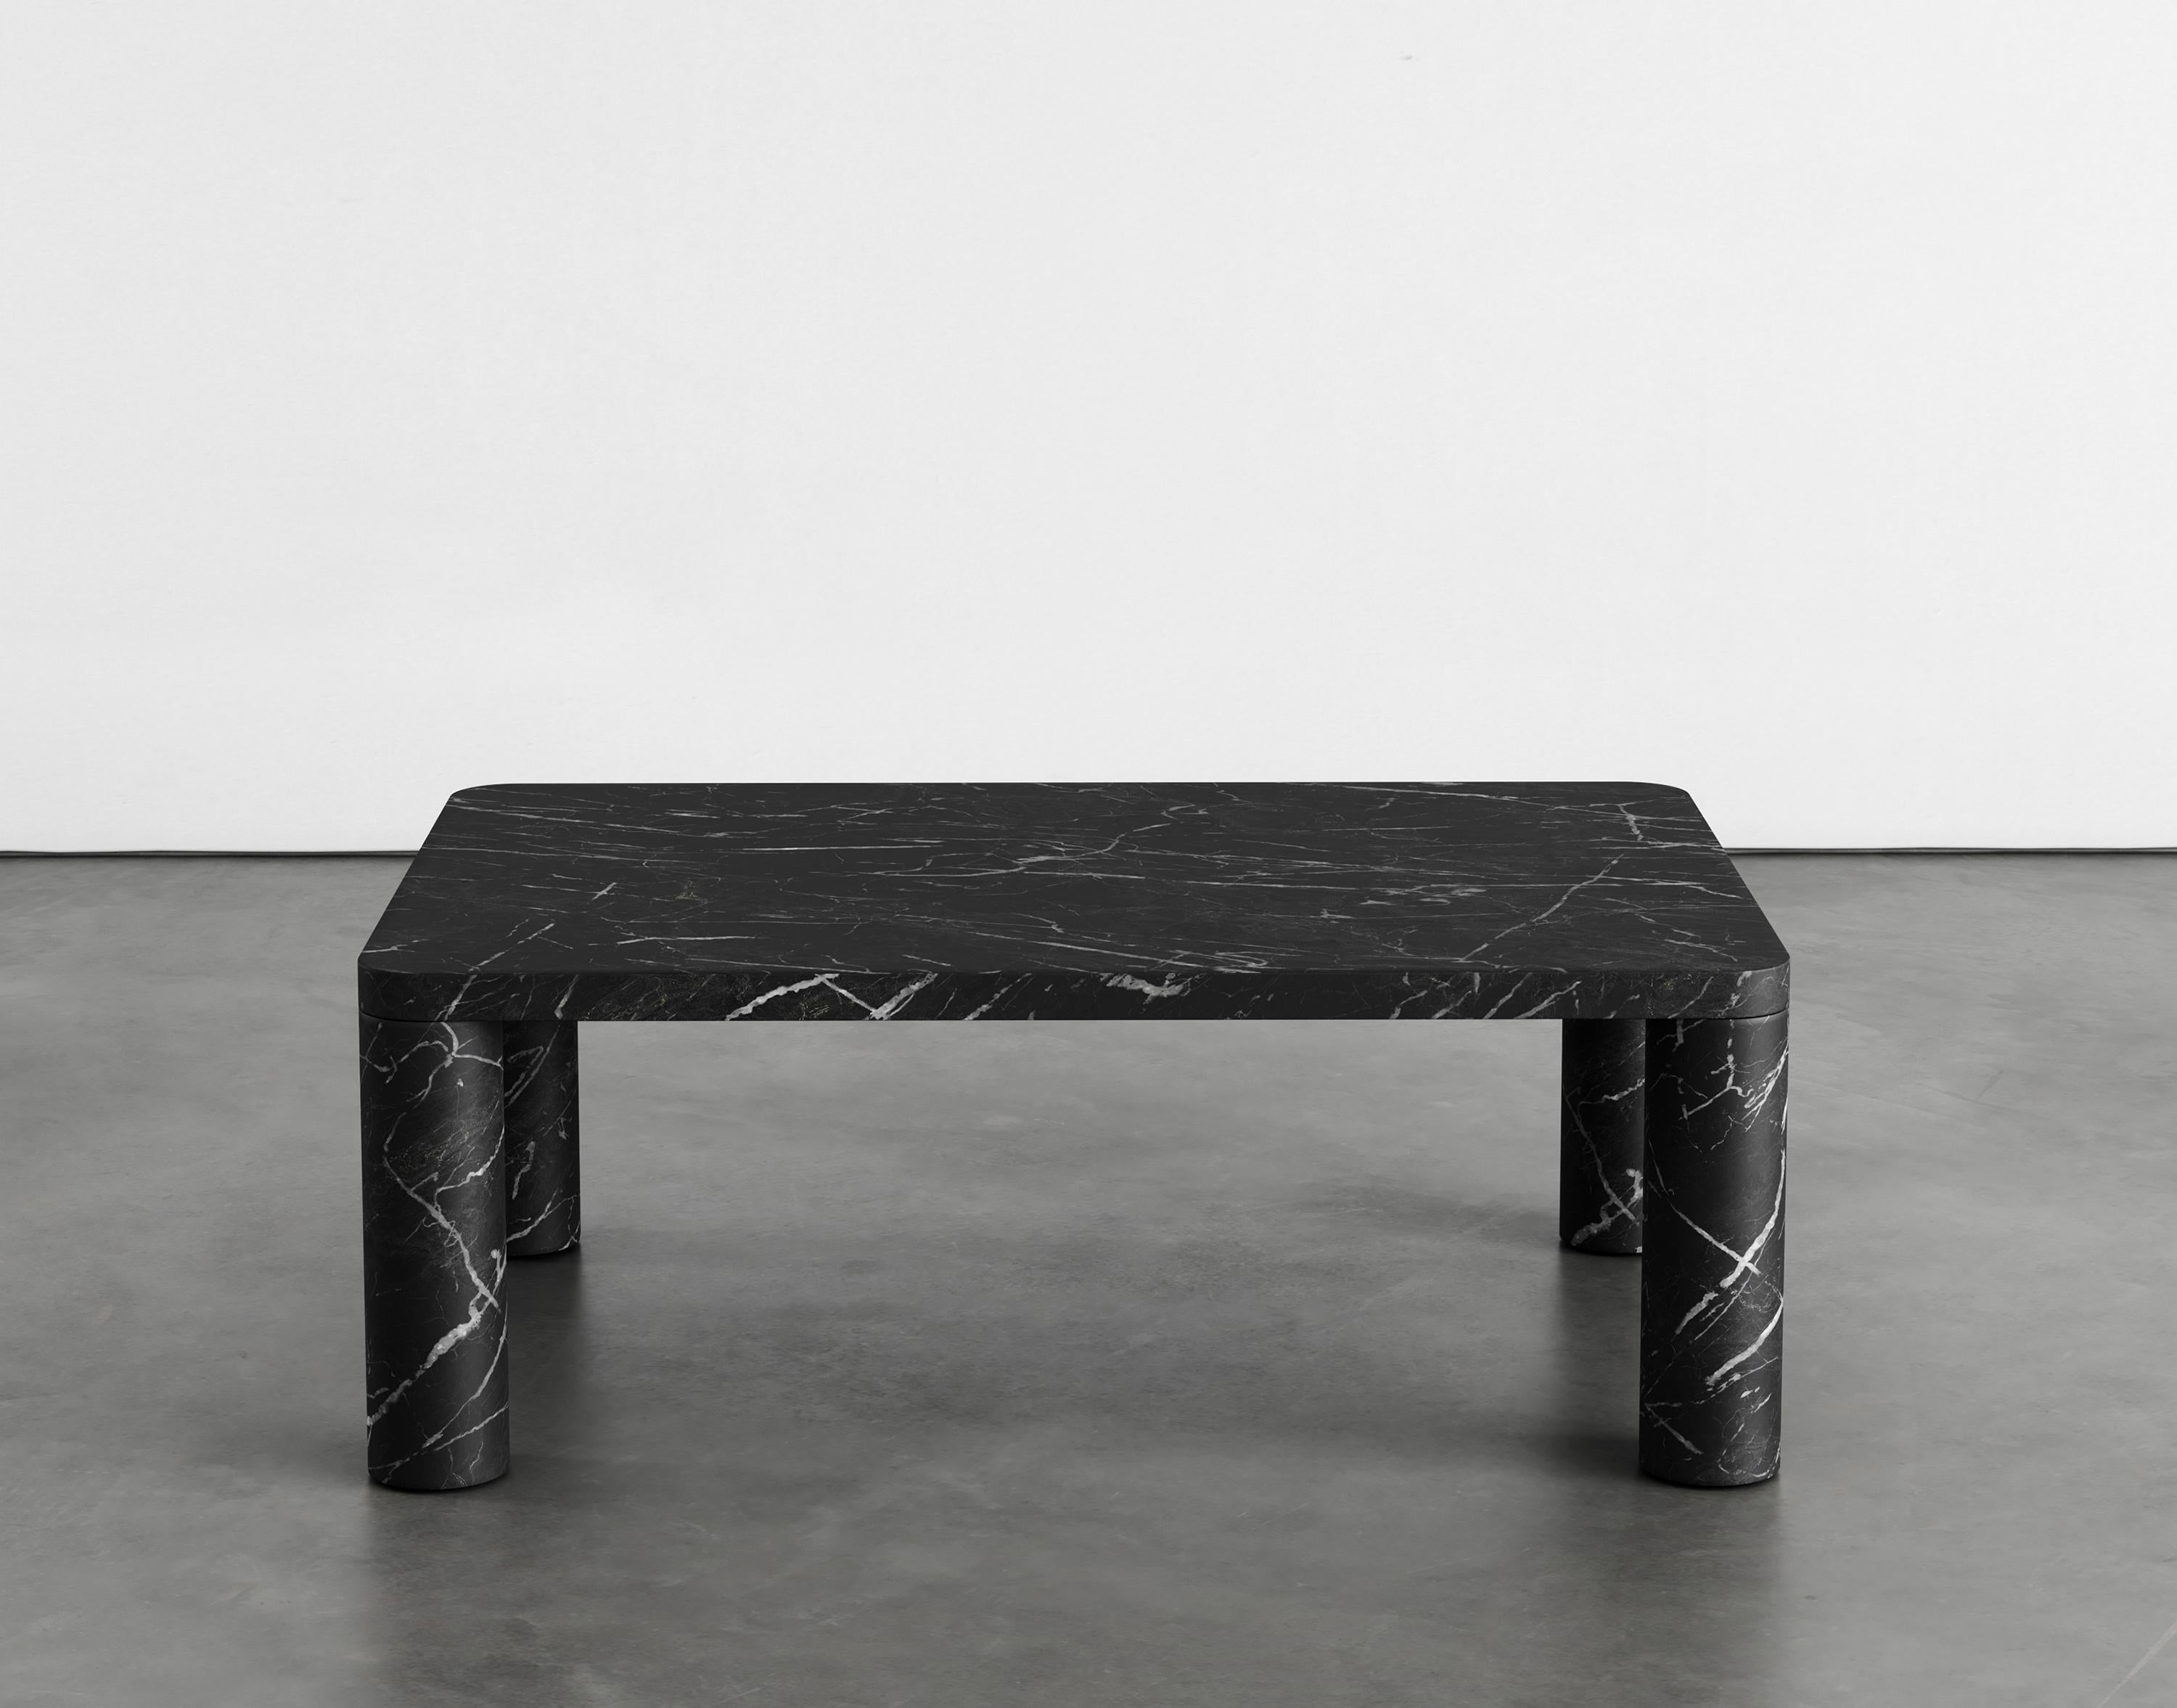 Nadia 96 marble coffee table by Agglomerati
Dimensions: D 90 x W 60 x H 33 cm
Materials: Nero Maquina marble
Available in other stones.

Nadia 96 Coffee Table is defined by its flush edge detailing. The rounded corners of the tabletop have a